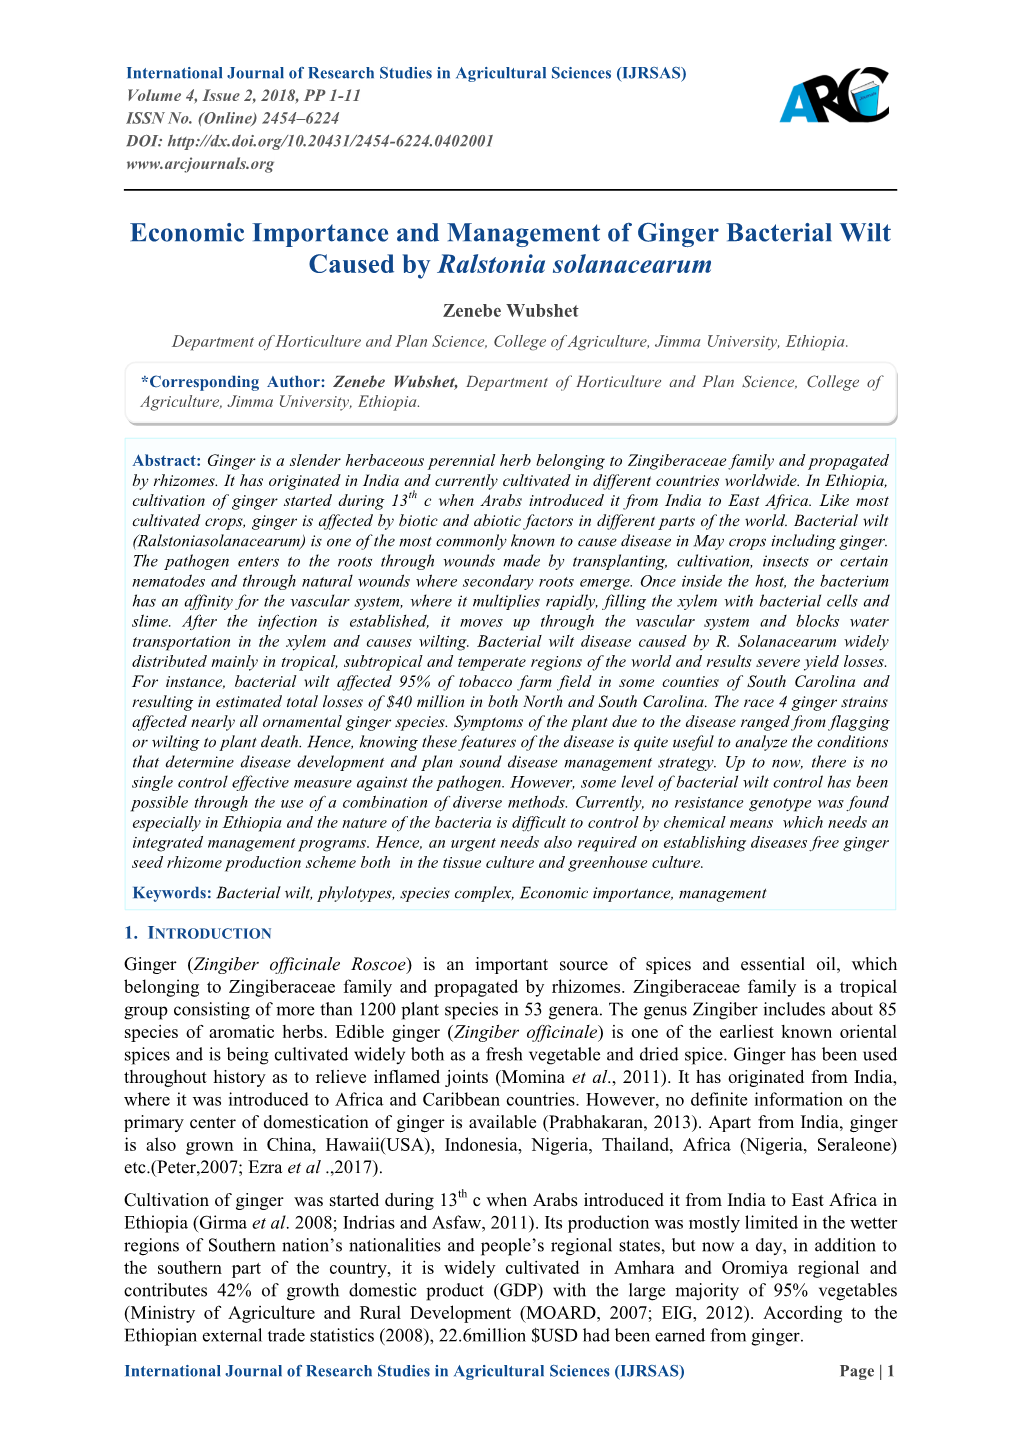 Economic Importance and Management of Ginger Bacterial Wilt Caused by Ralstonia Solanacearum